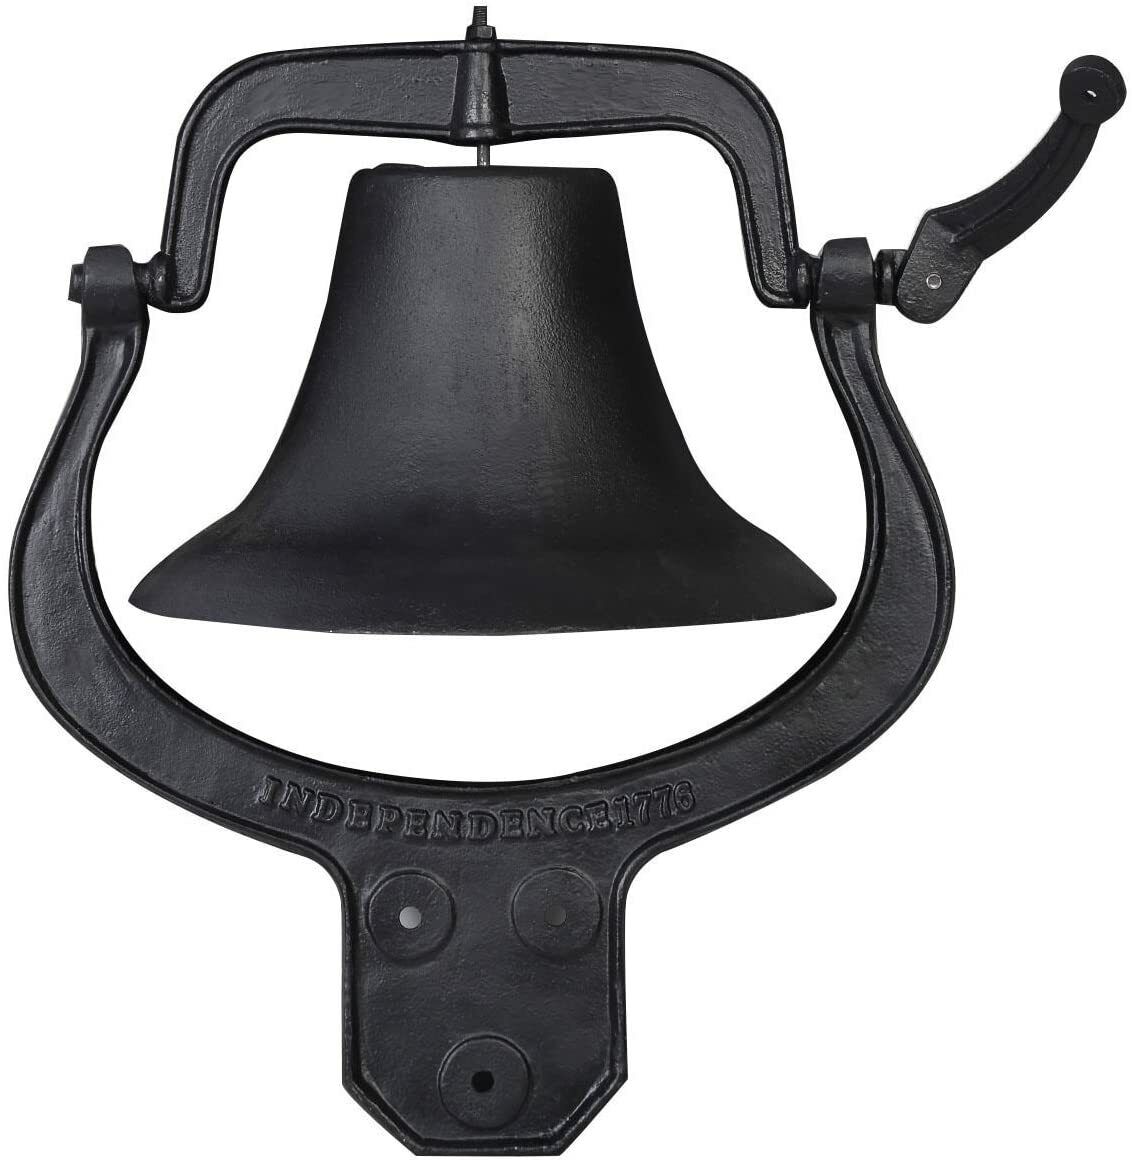 Large Church Door Bell School Antique Vintage Style Large Cast Iron Dinner Bell